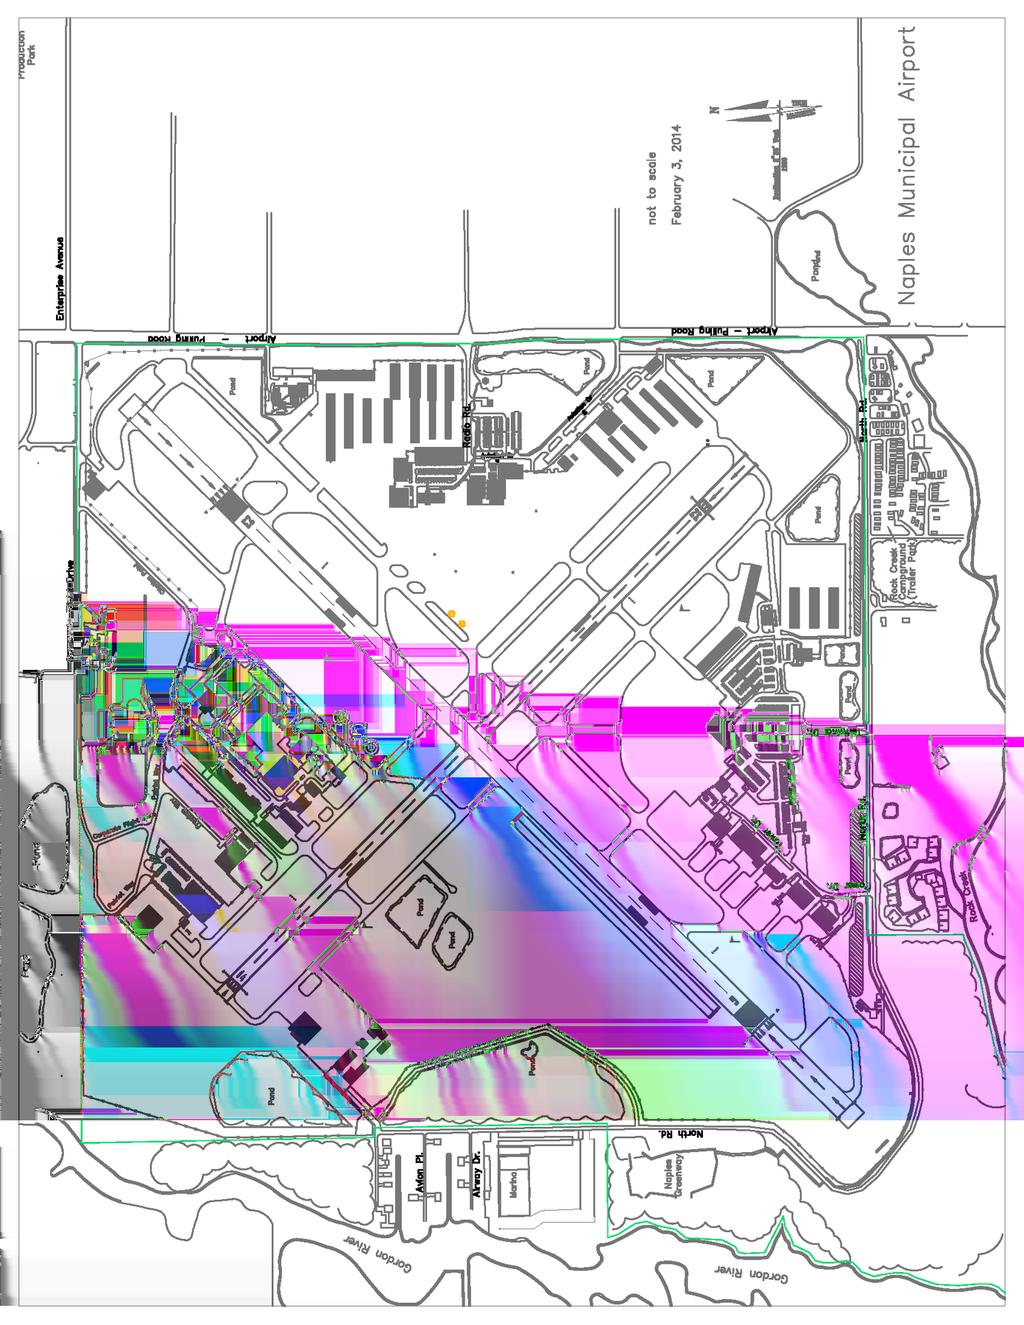 NOISE ABATEMENT PROCEDURES by Whispertrack Diagram #4: Updated Airport Diagram